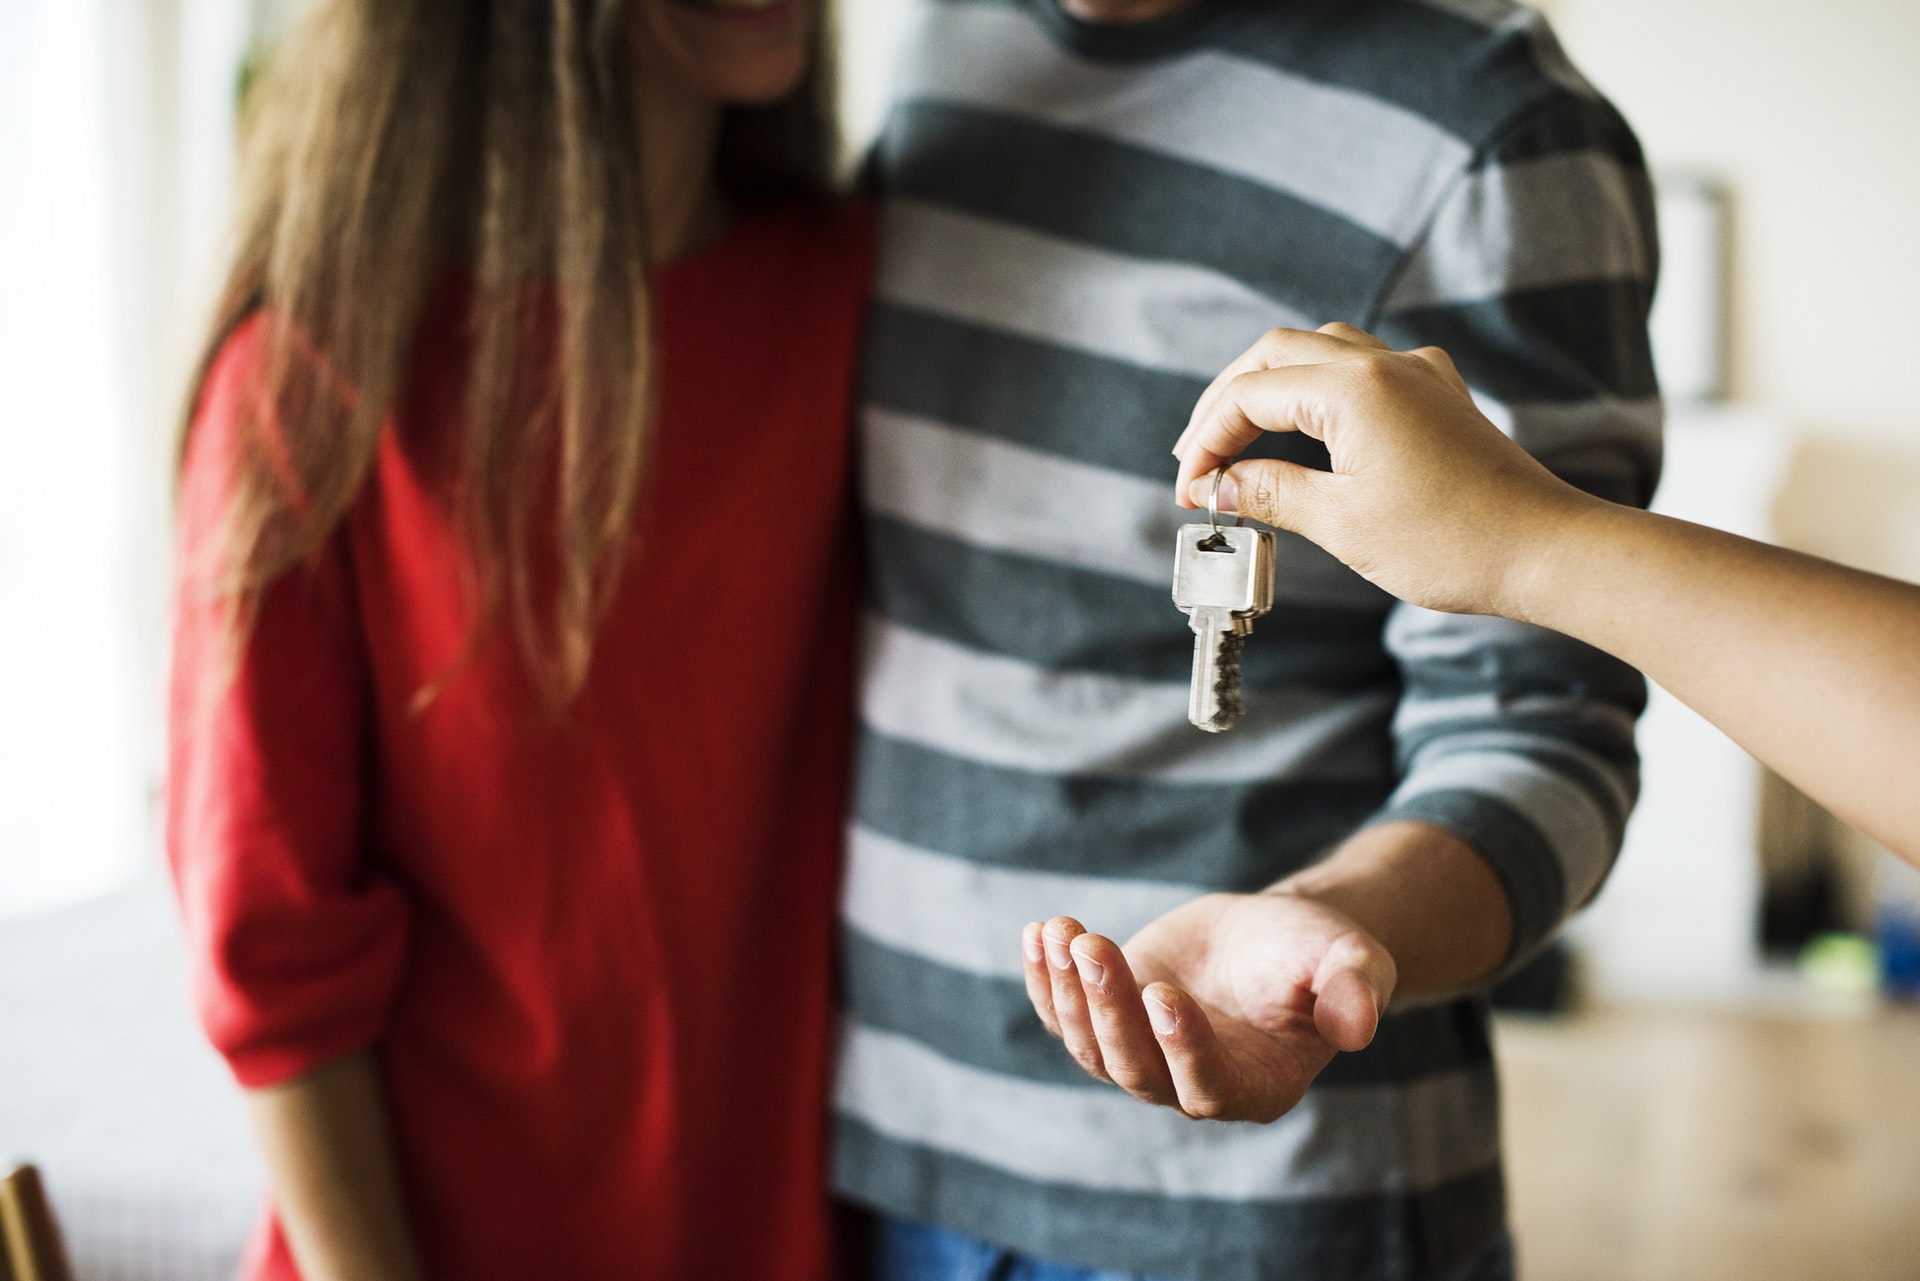 Decorative image of person handing over keys.